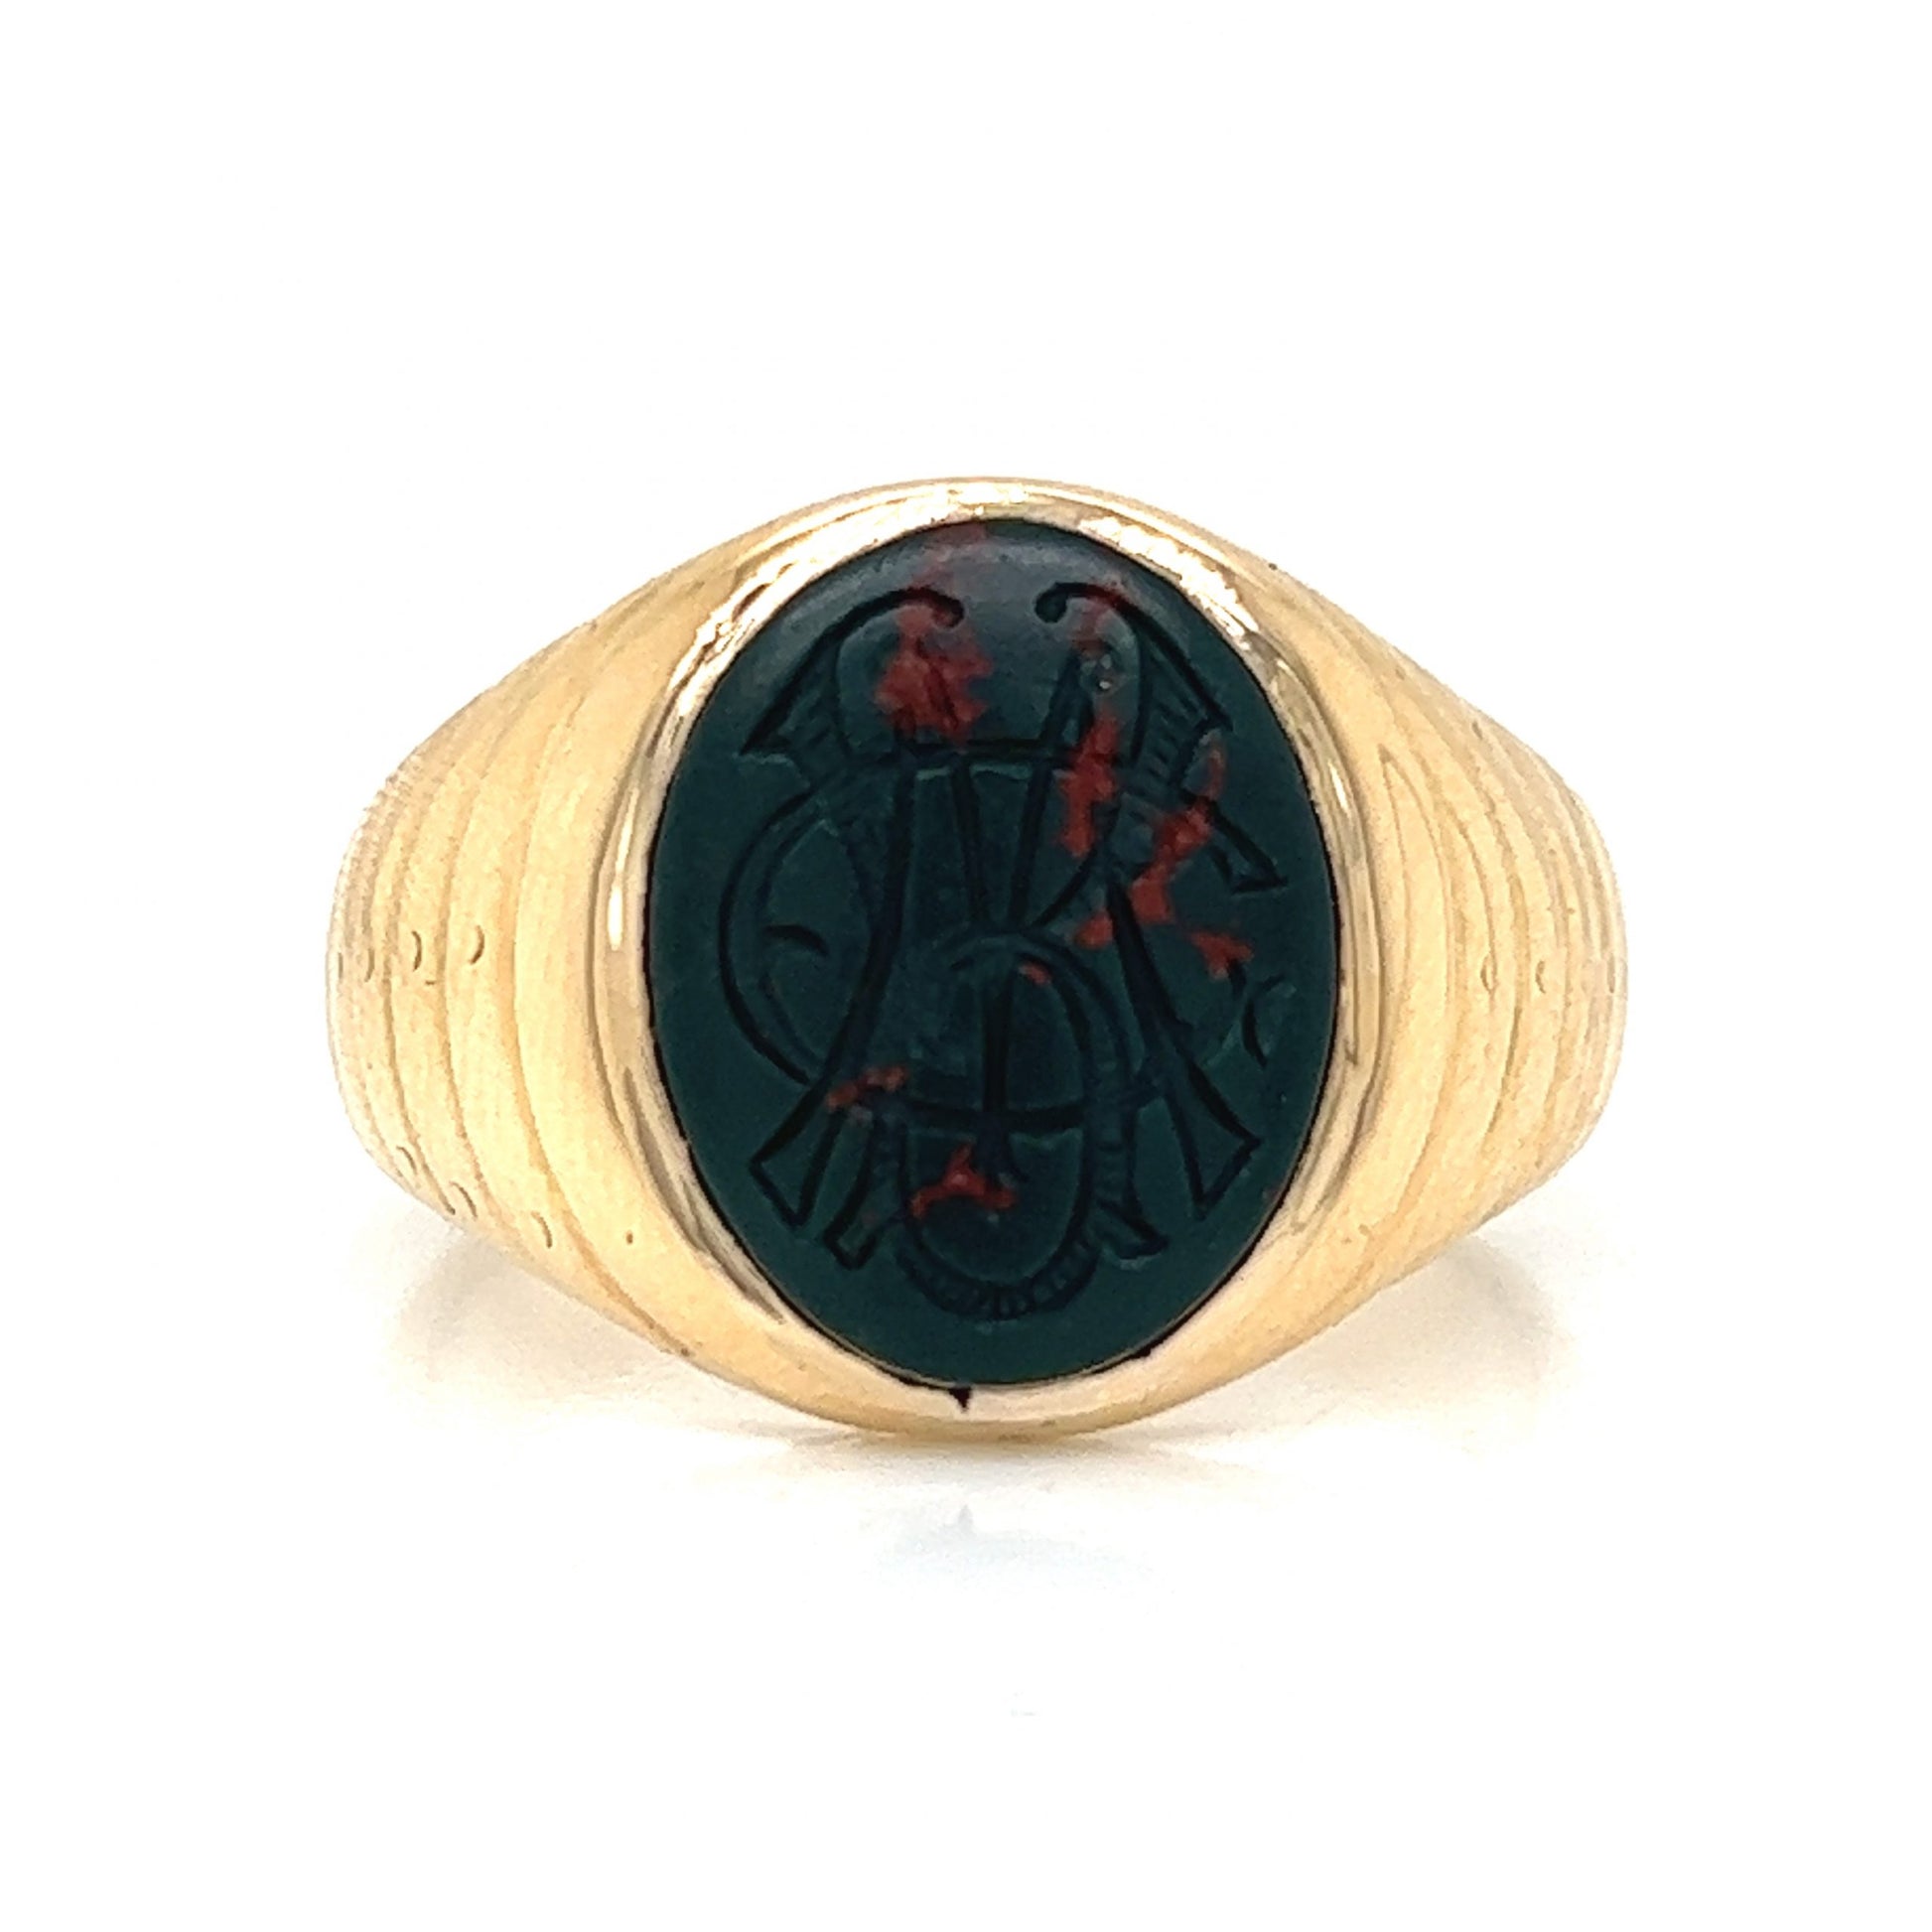 Vintage Men's Carved Bloodstone Ring in 14k Yellow GoldComposition: 14 Karat Yellow GoldRing Size: 10Total Gram Weight: 12.9 gInscription: 14k